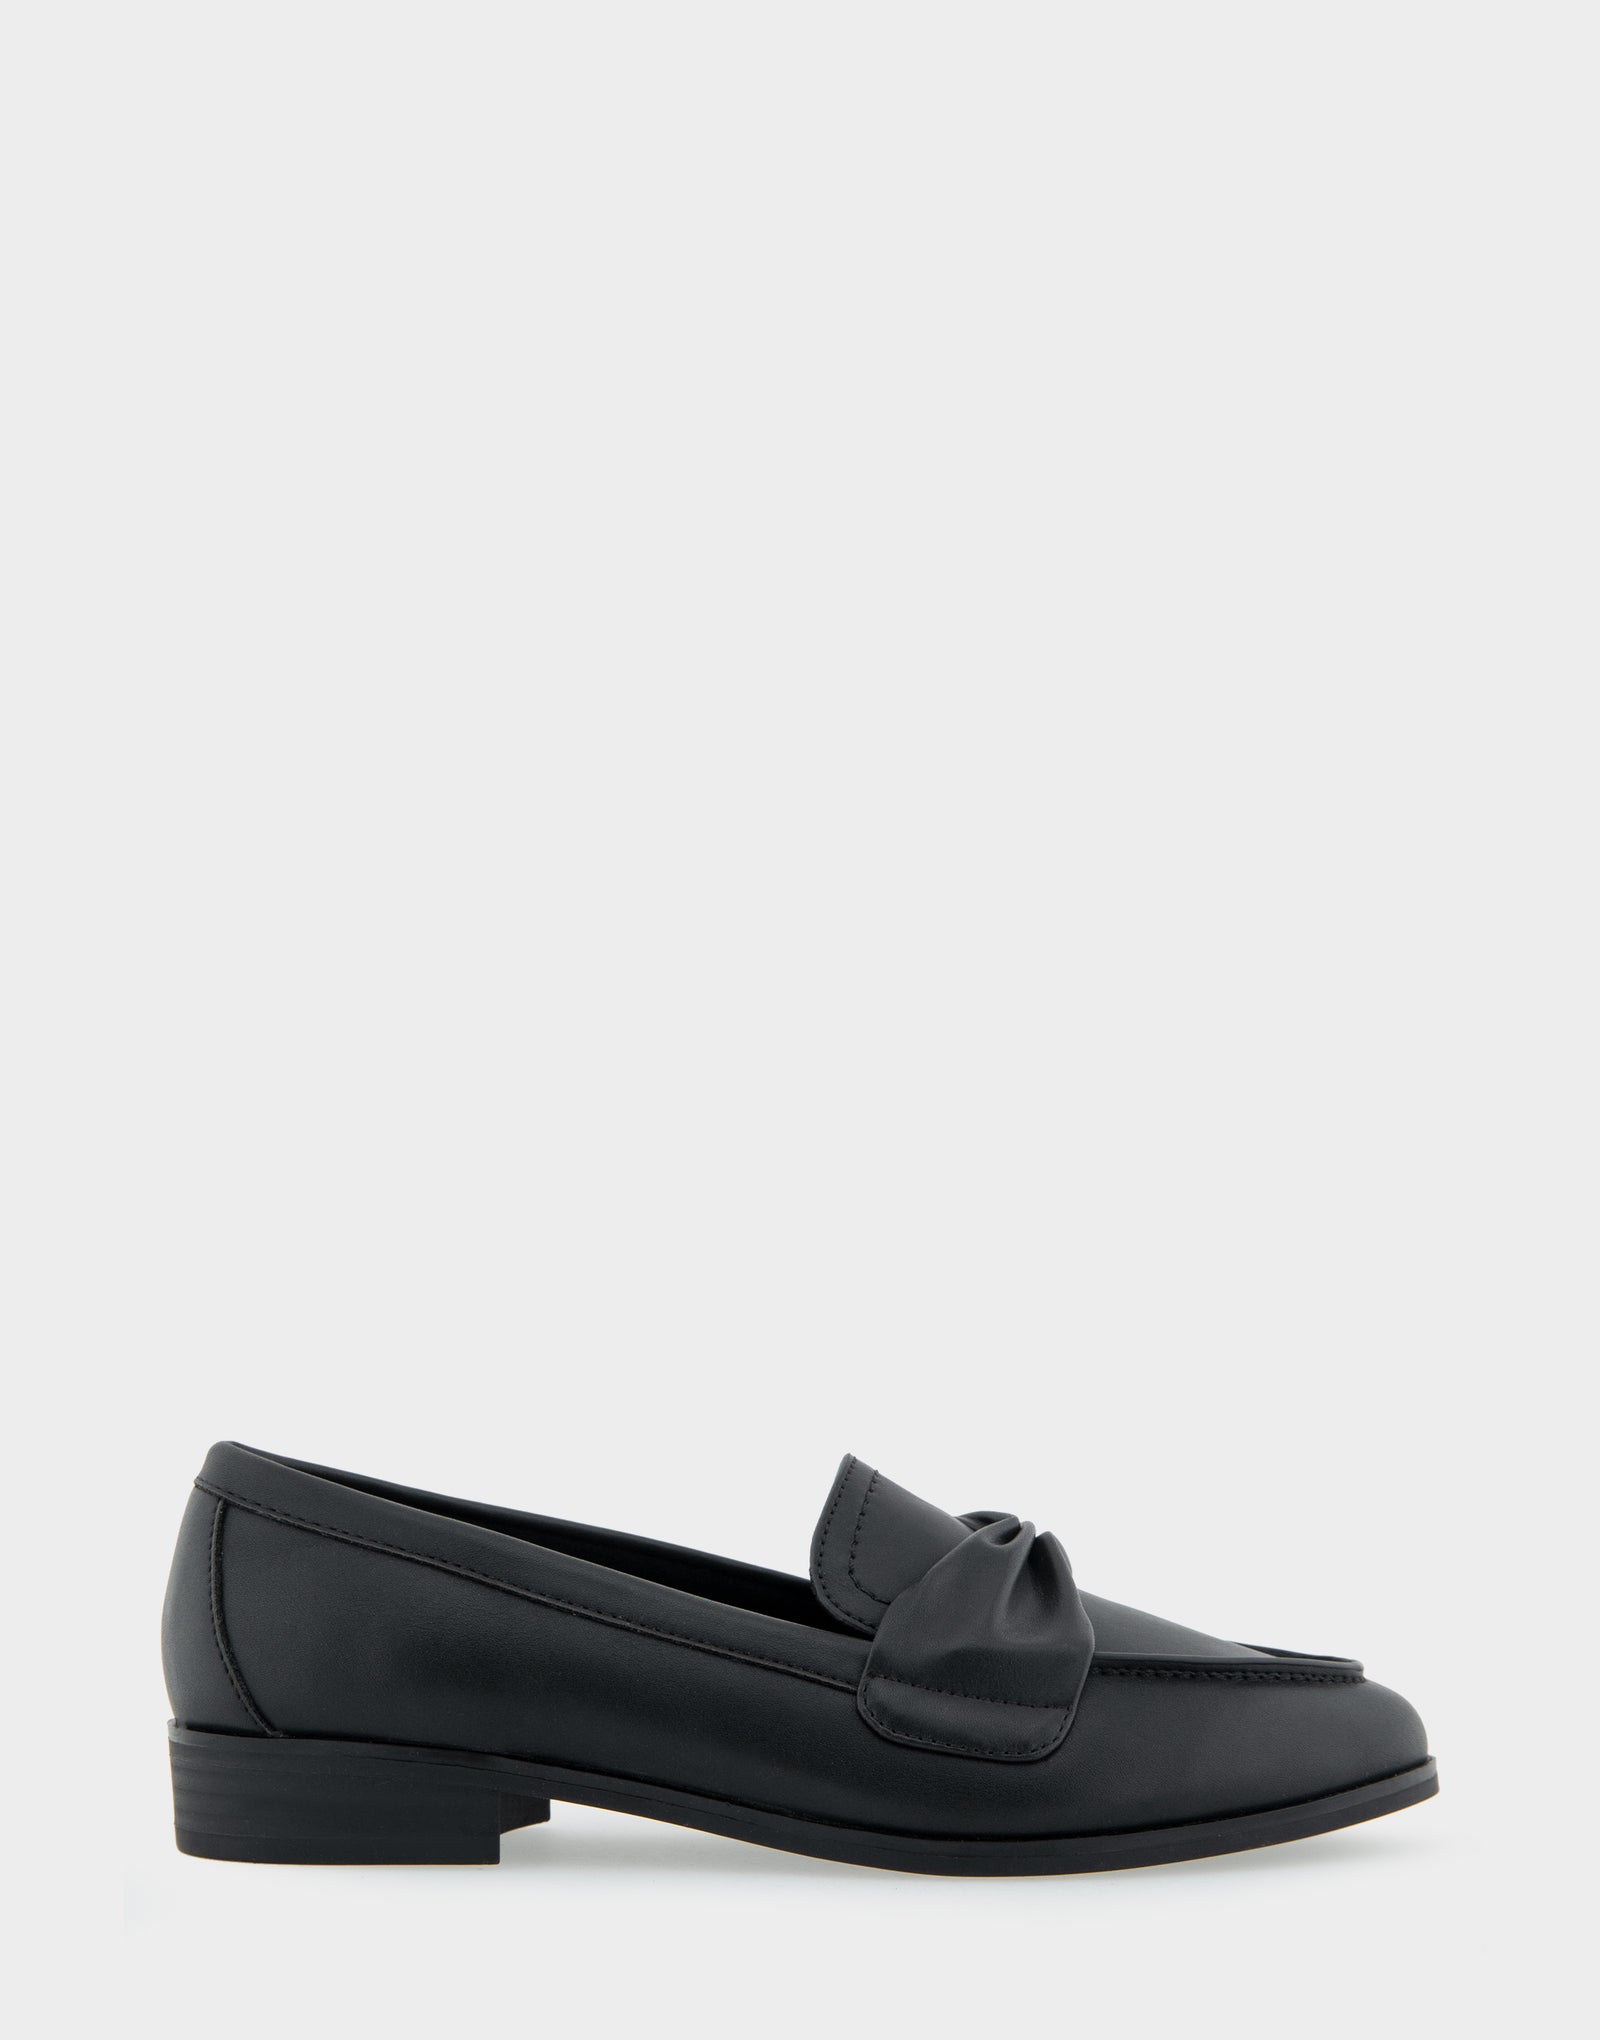 Women's Tailored Loafer in Black Faux Leather